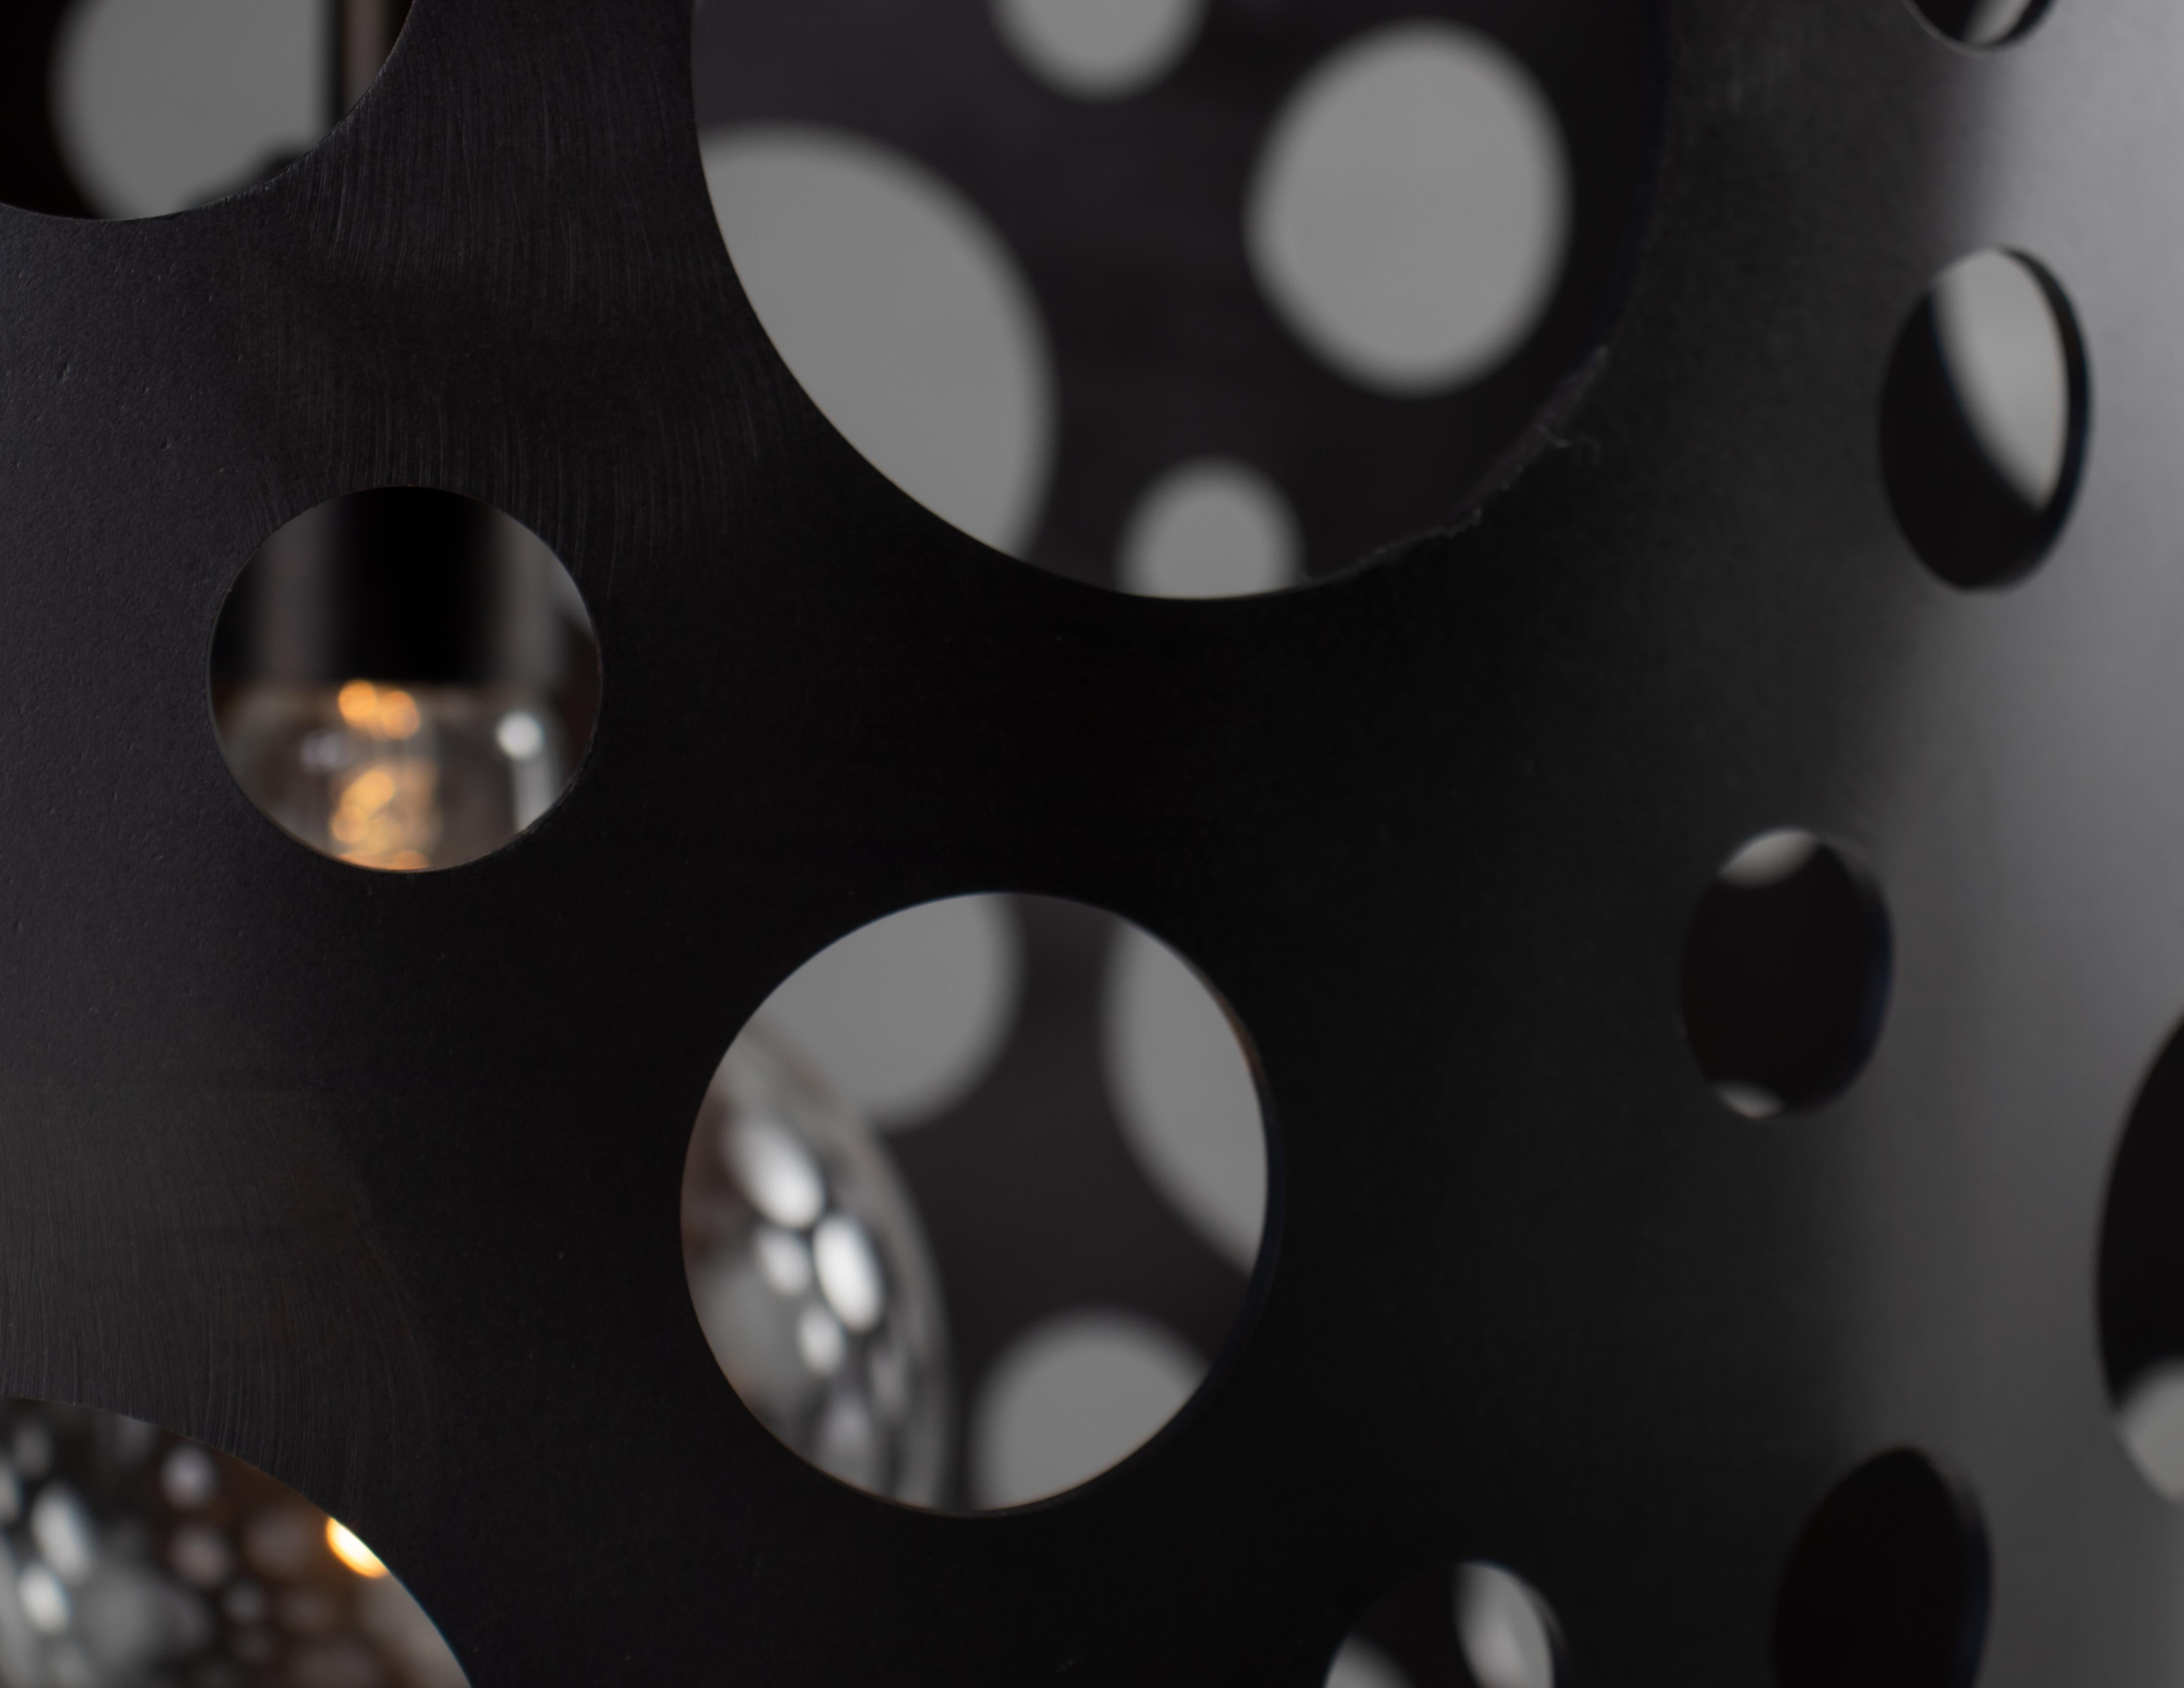 Italian RENG, Pierce II, Forged Steel, Perforated Circular Cut Outs on Cylinder Body